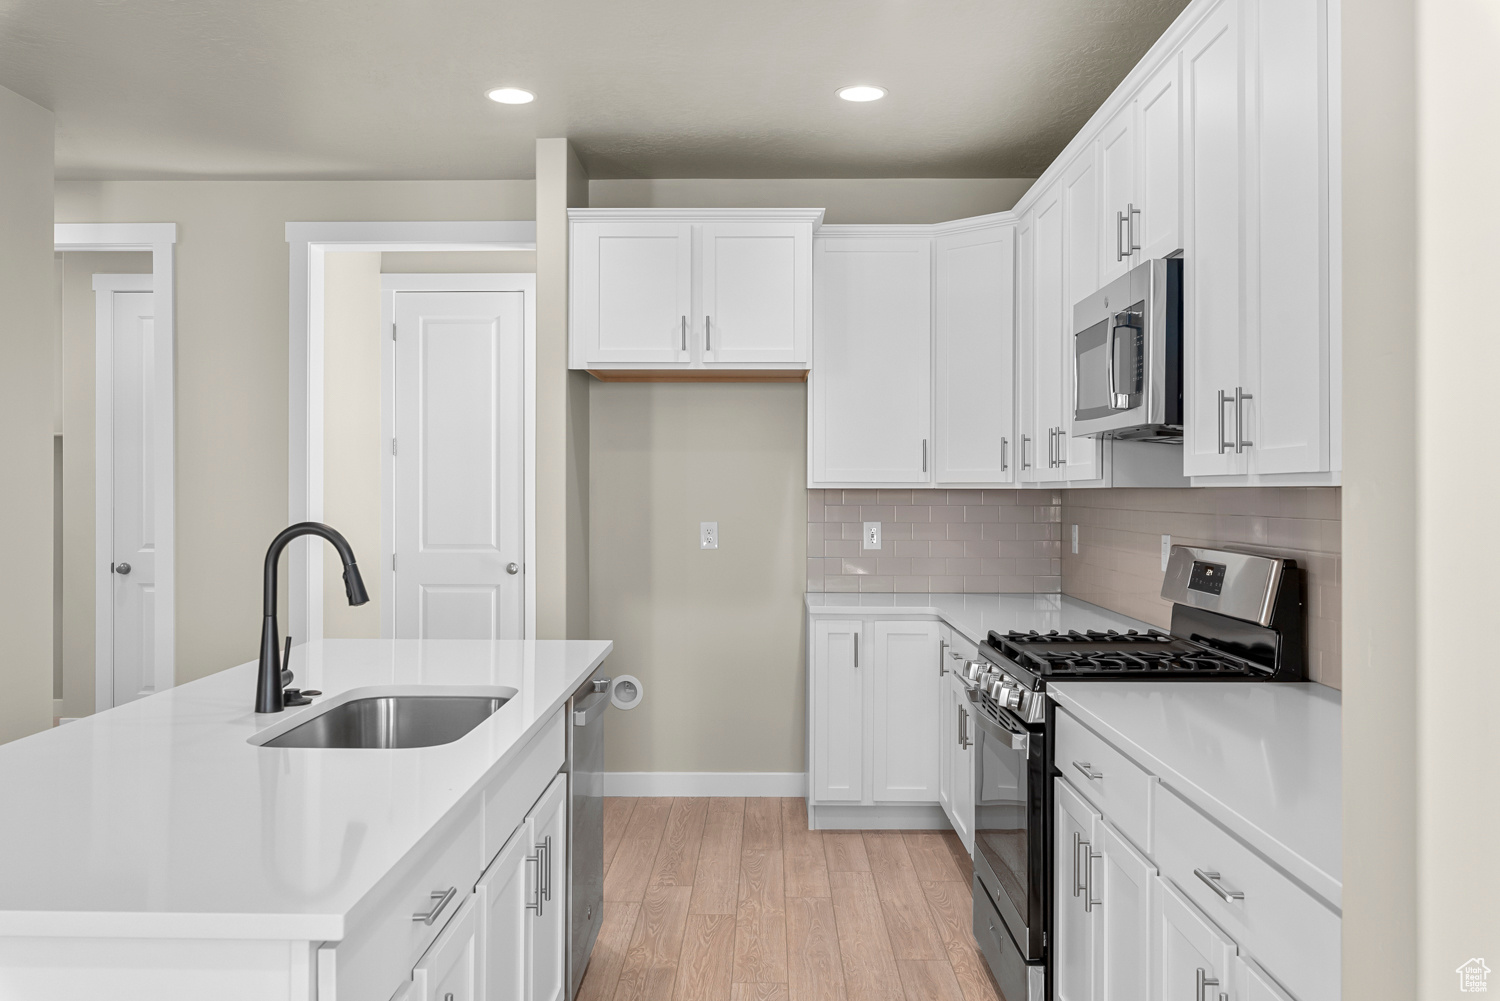 Kitchen with sink, white cabinets, appliances with stainless steel finishes, and light wood-type flooring